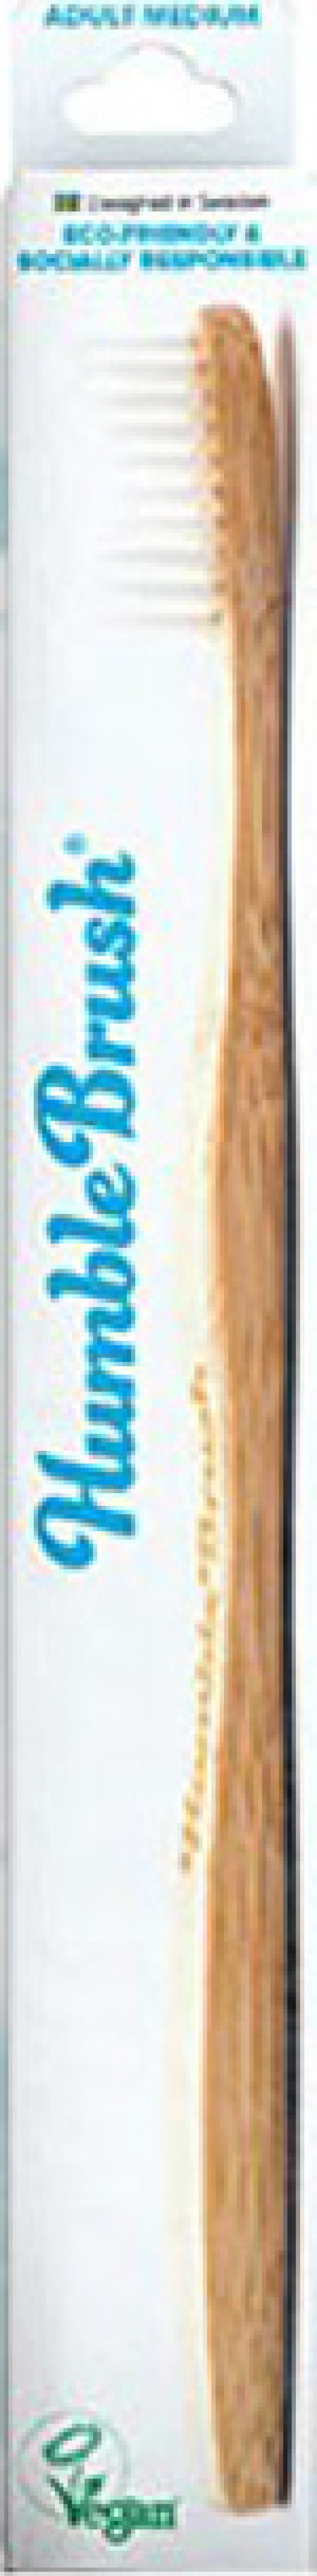 The Humble Co. Toothbrush Bamboo White Λευκή Οδοντόβουρτσα Απο Μπαμπού Adult Medium 1 τμχ product photo